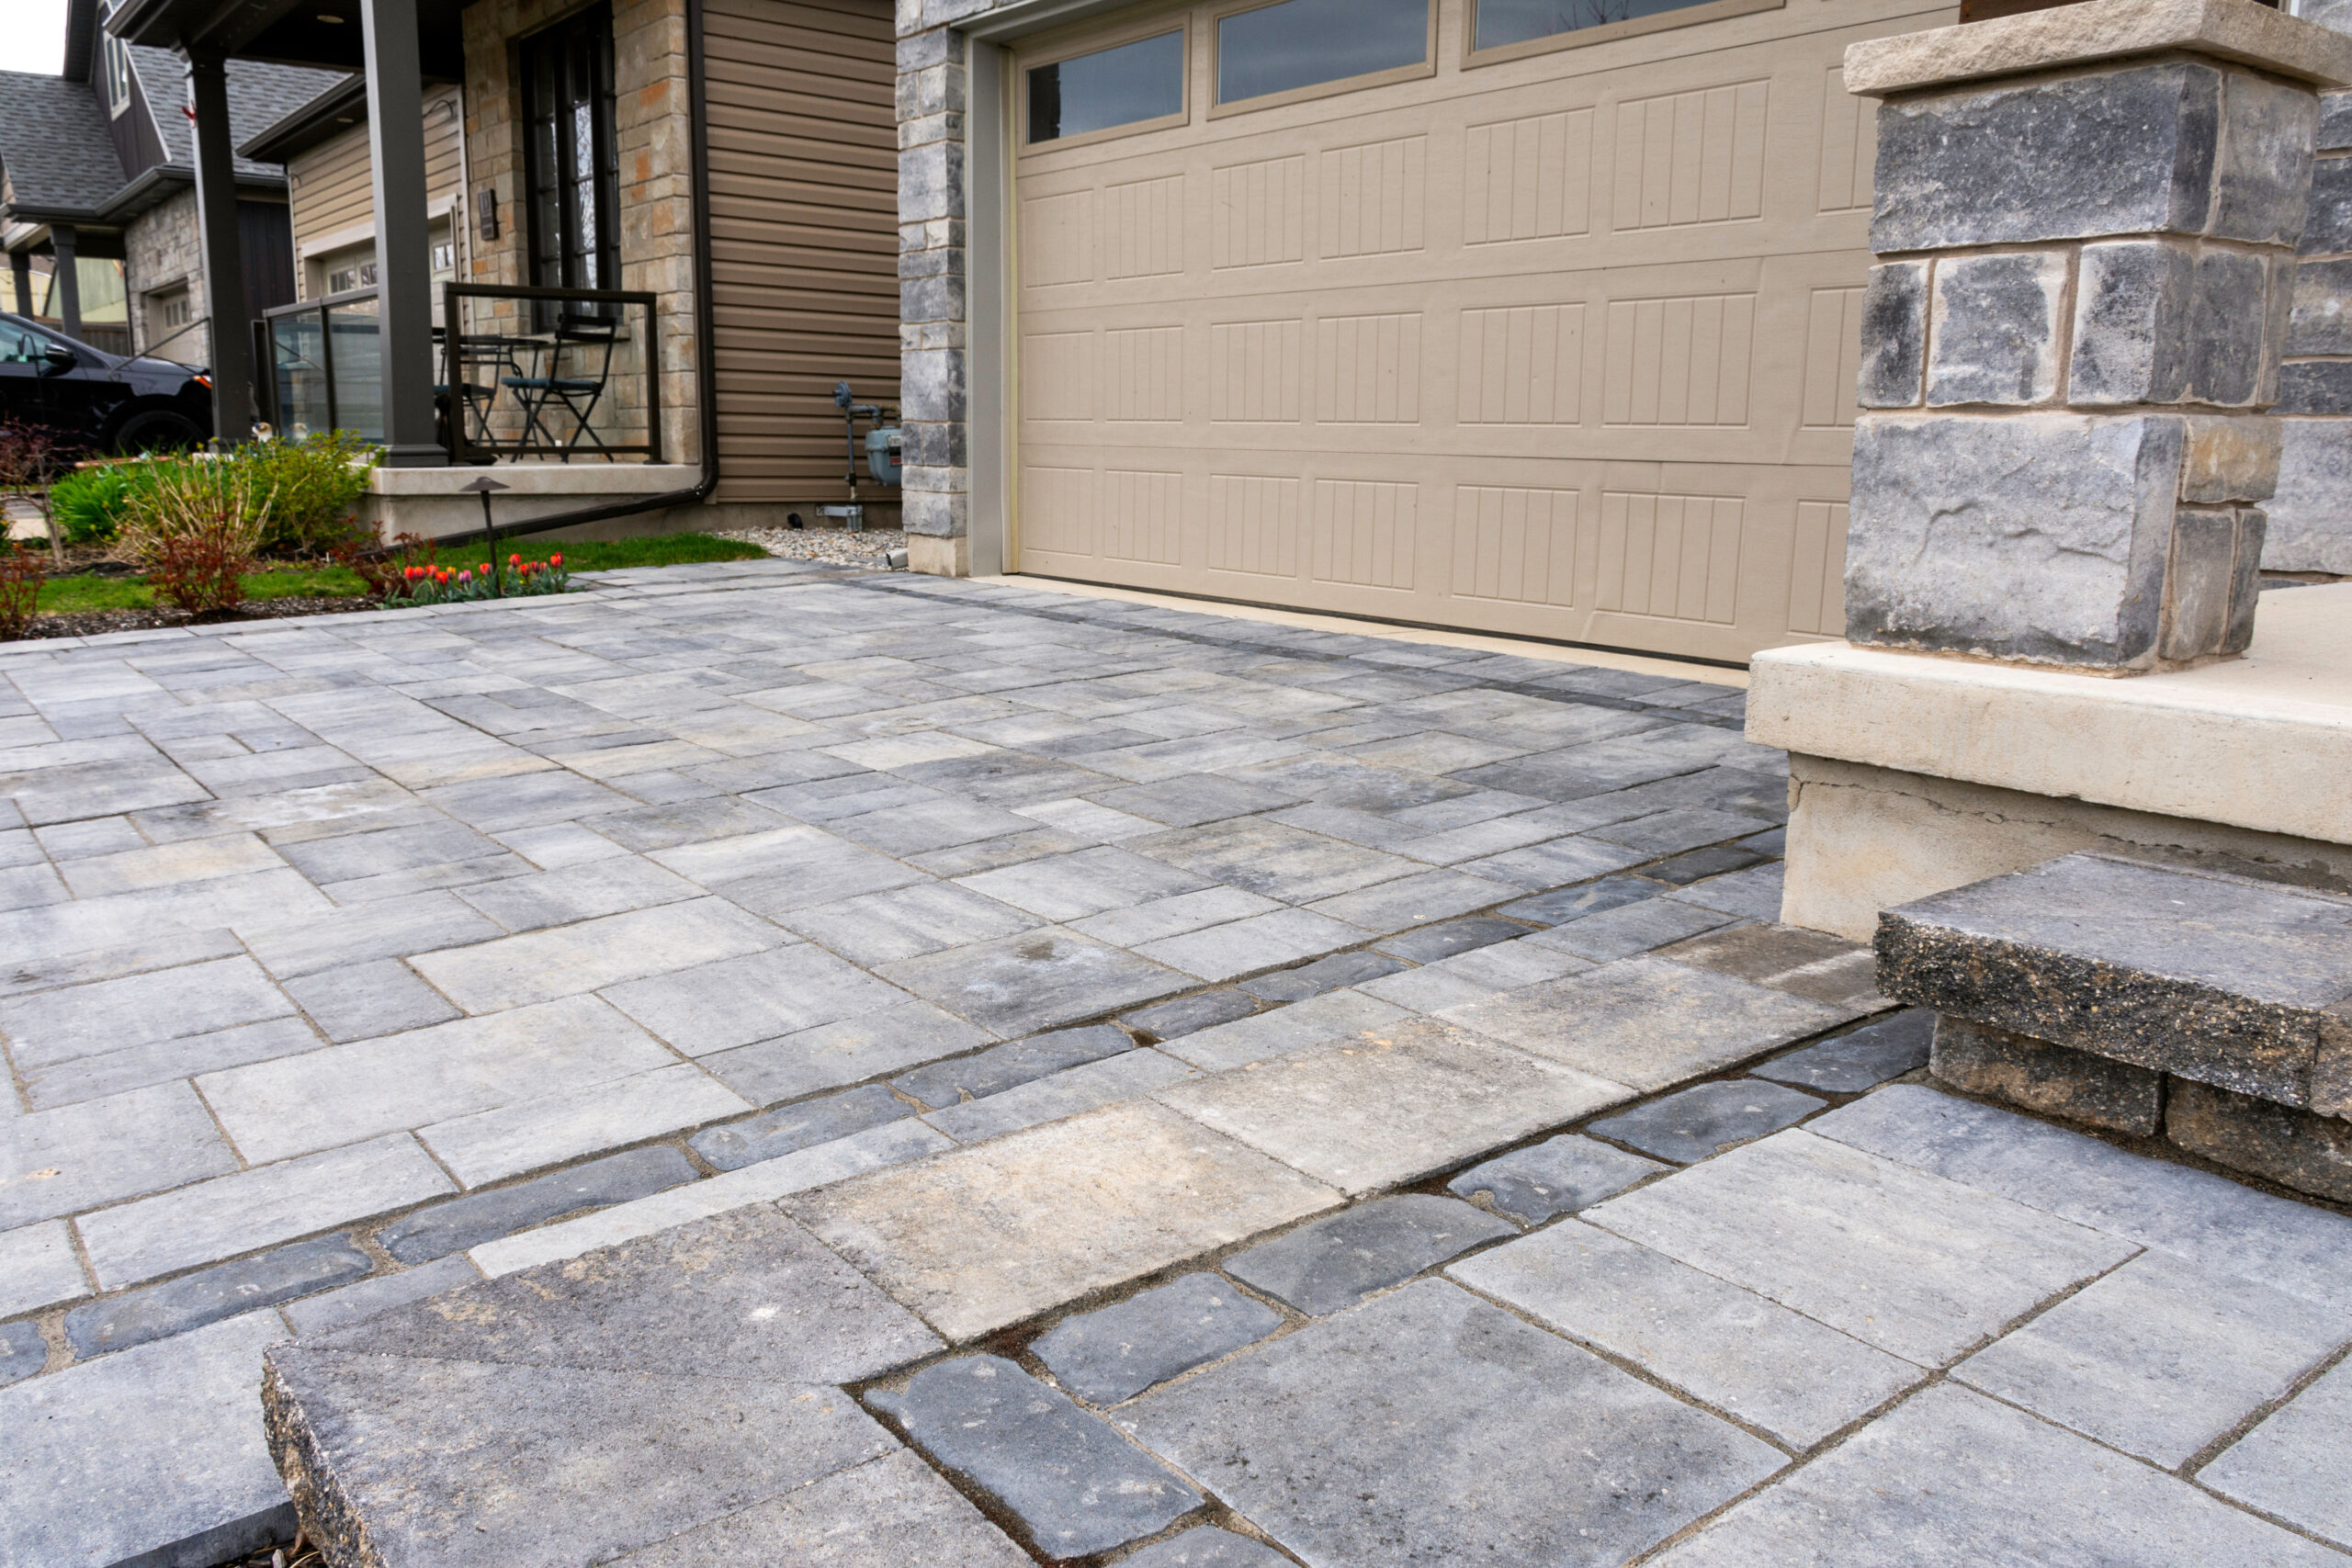 Luxury hardscape driveway shows pavers with pattern and and mat